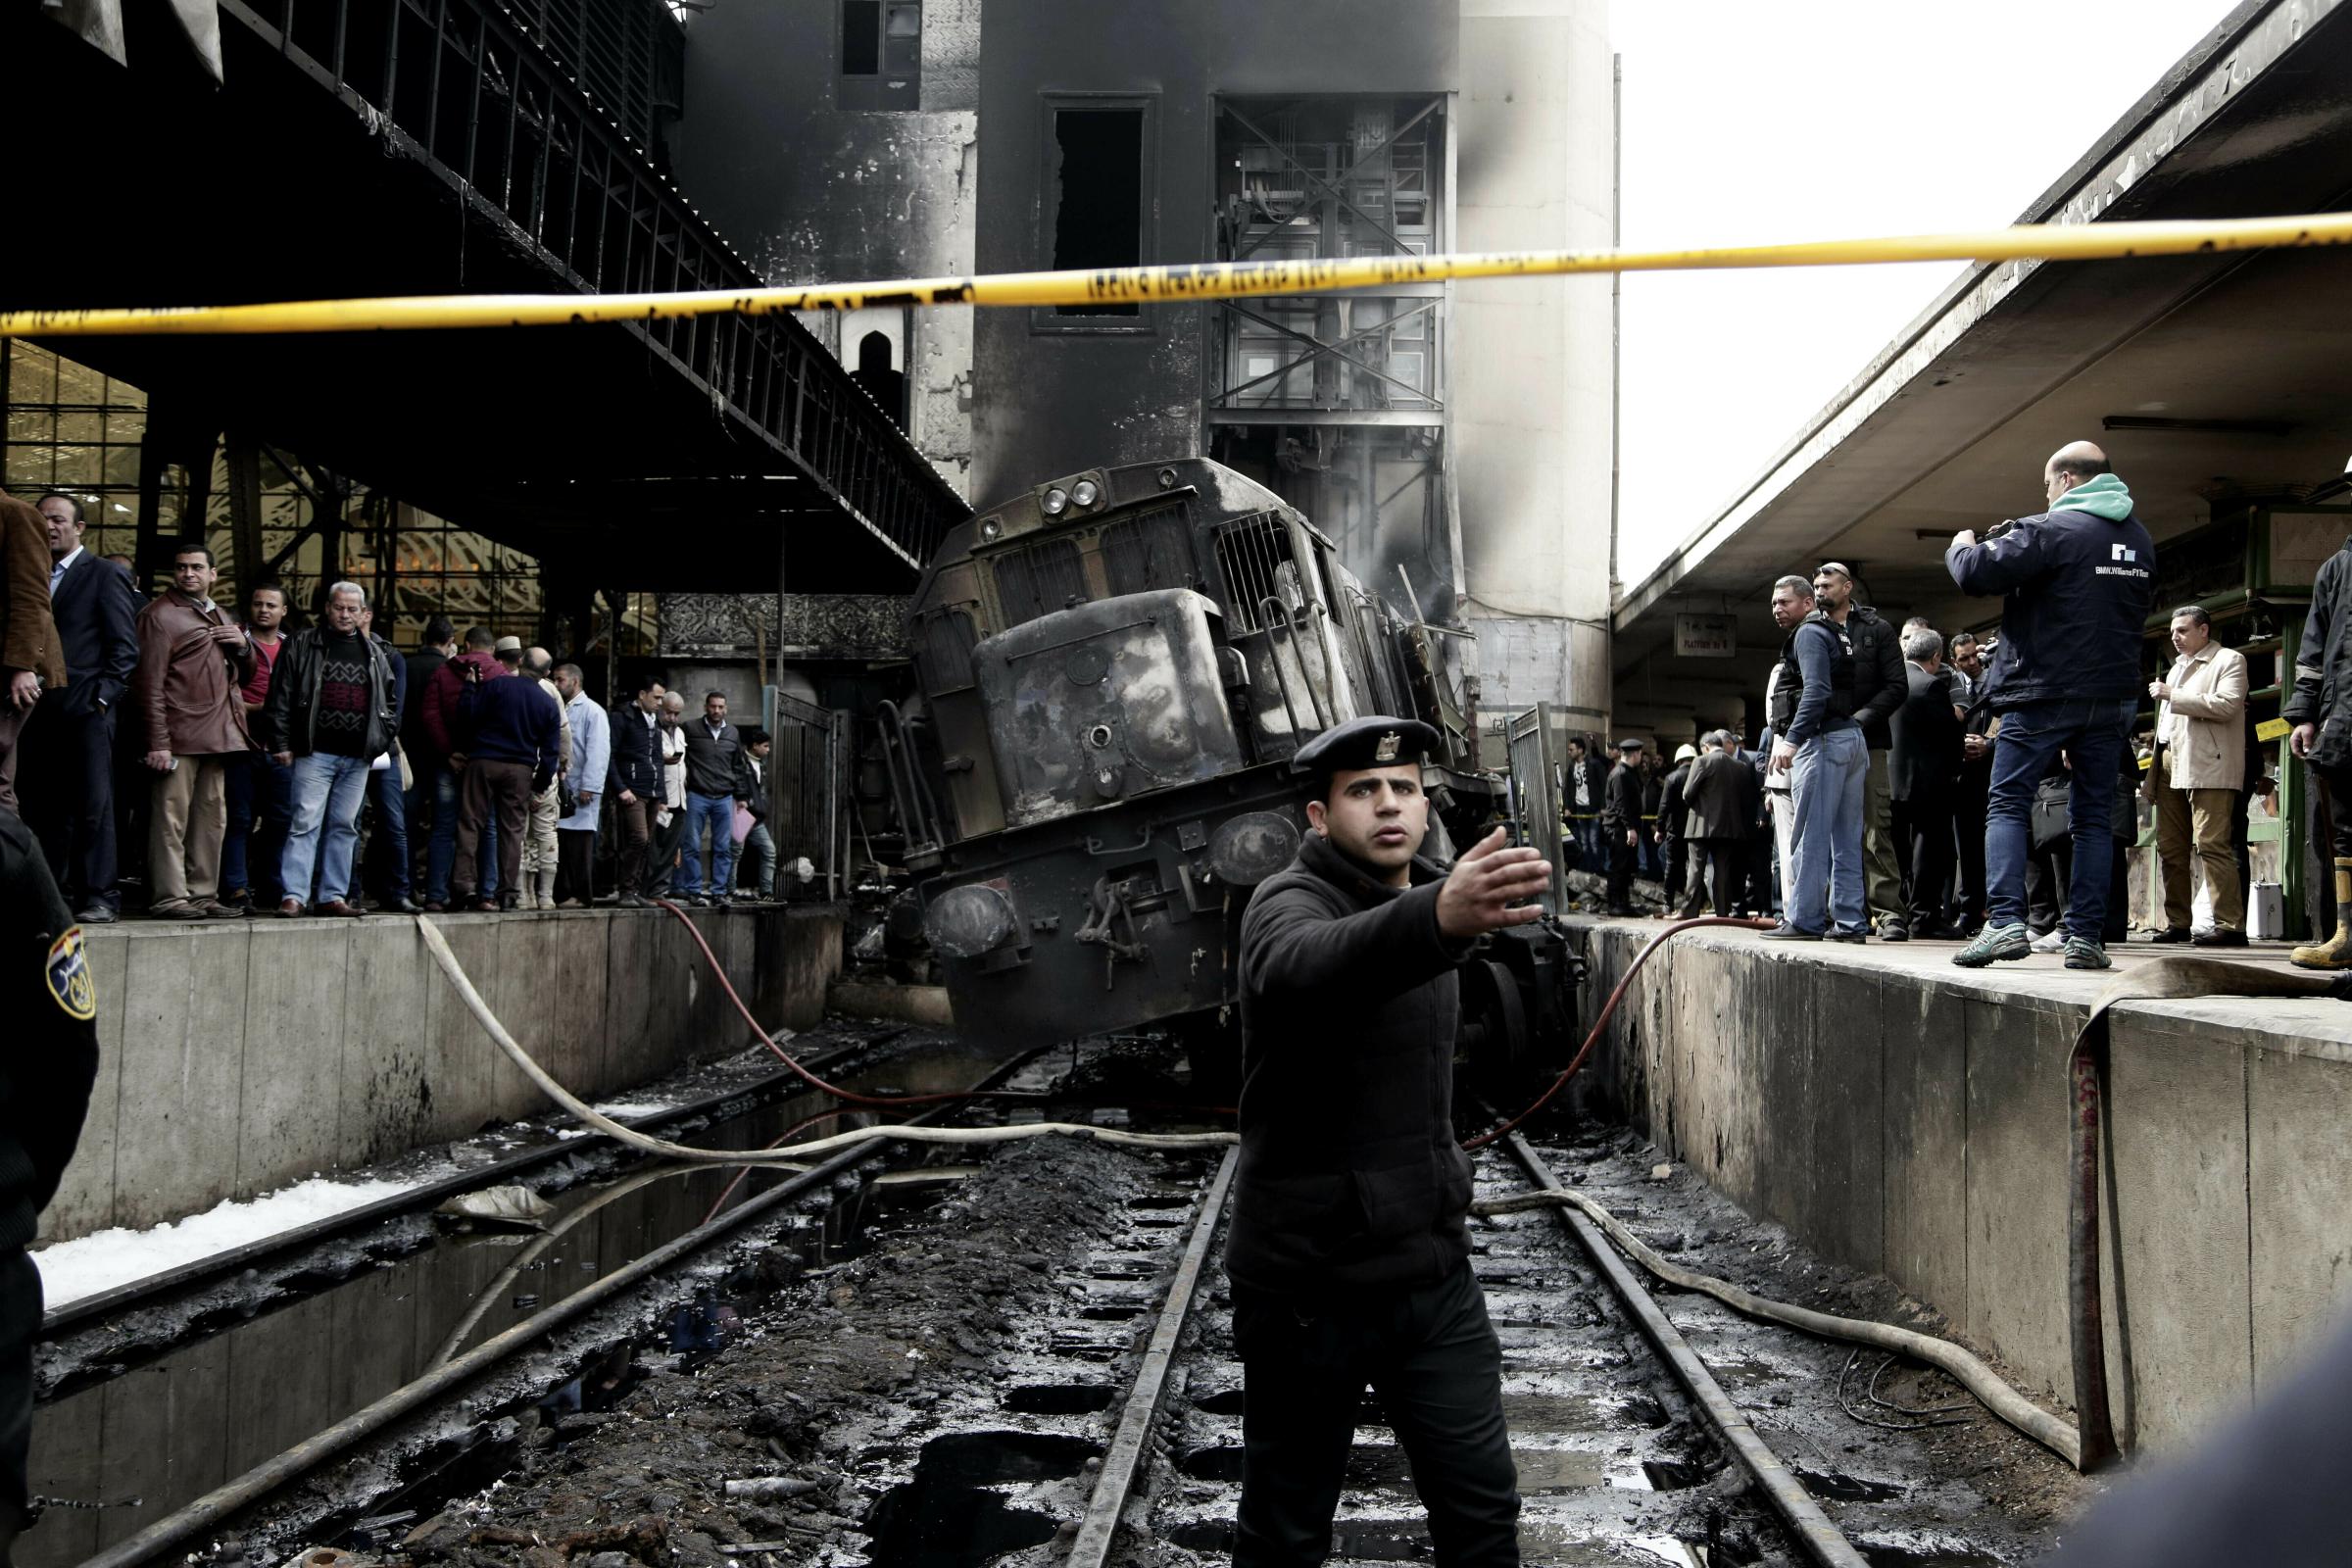  Policemen stand guard in front of a damaged train inside Ramsis train station in Cairo on Feb. 27, 2019. An Egyptian medical official said at least 20 people have been killed and dozens injured after a railcar rammed into a barrier inside the station causing an explosion of the fuel tank and triggering a huge blaze that engulfed that part of the station. 